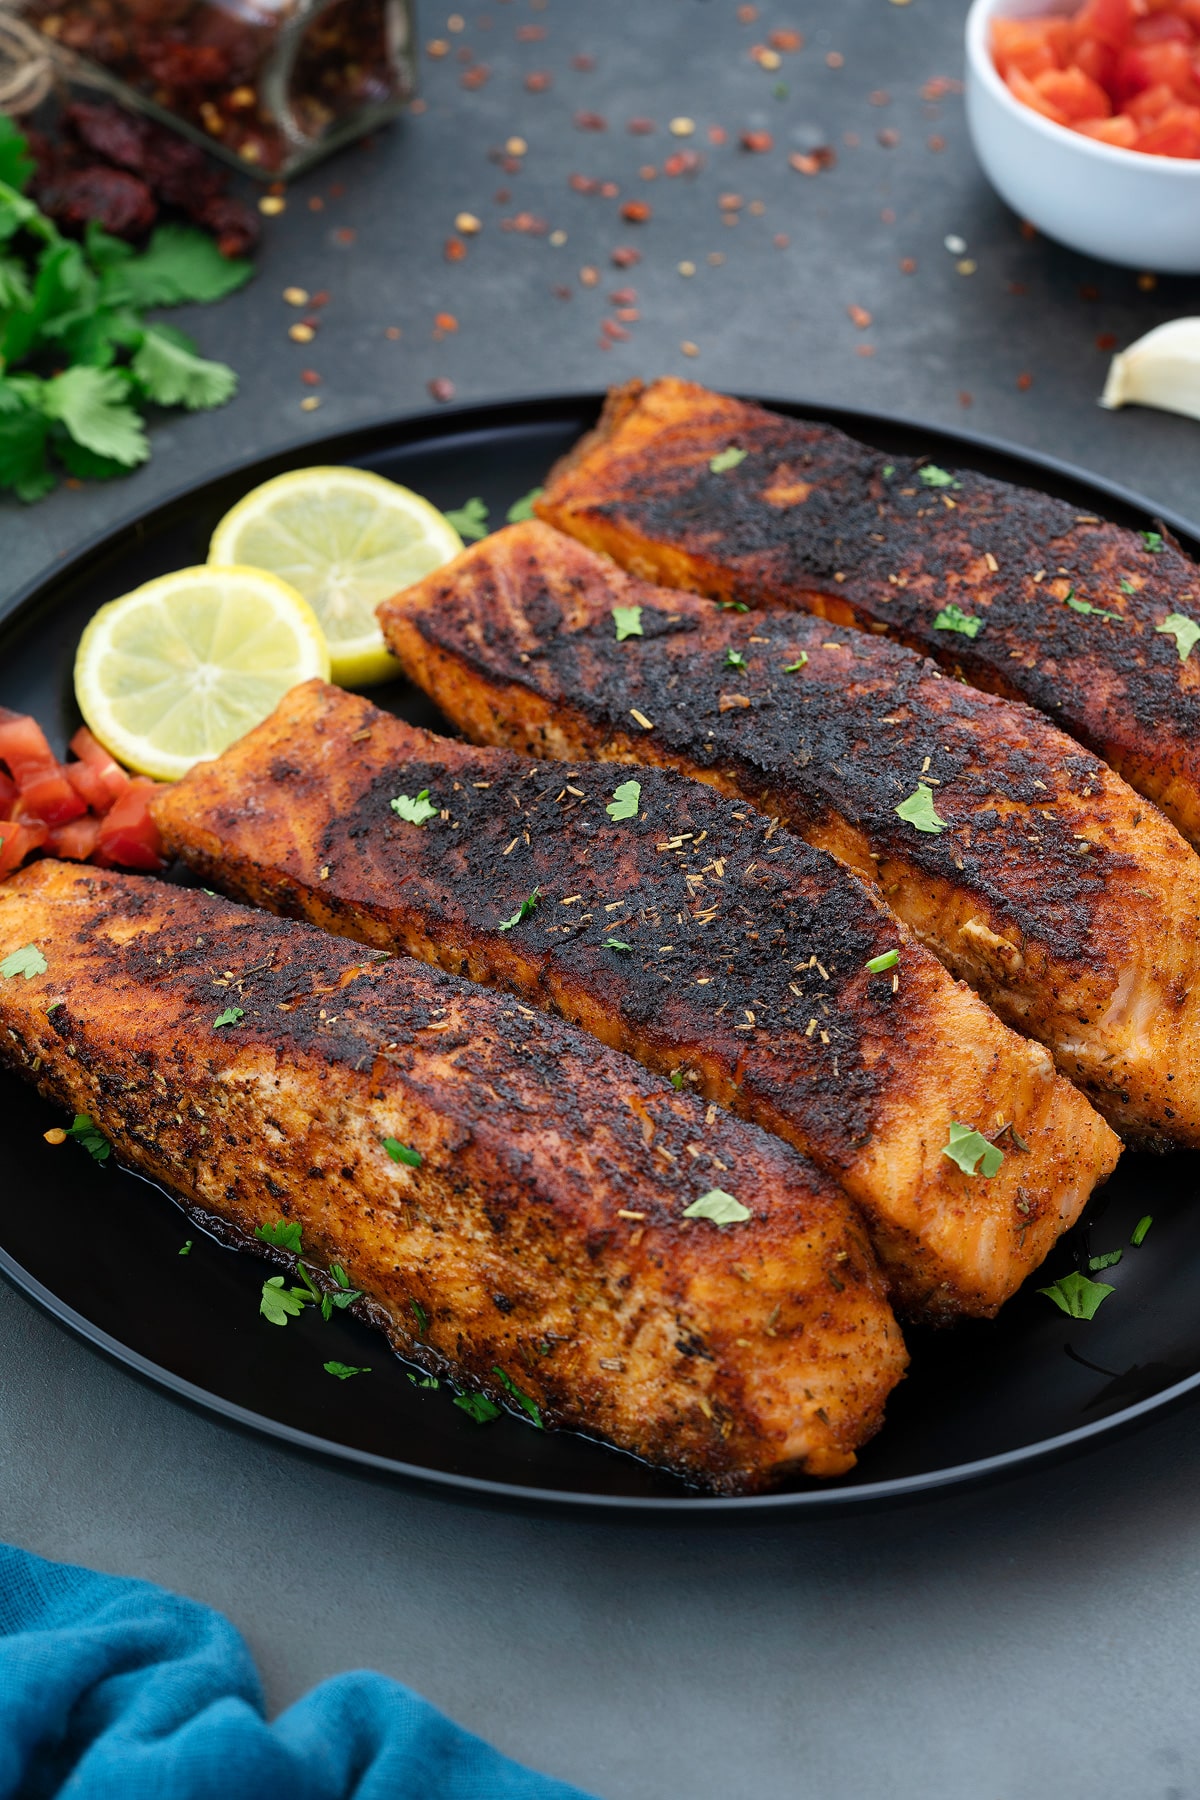 Homemade Blackened Salmon in a black plate with lemon slices and tomato pieces with few ingredients scattered around.